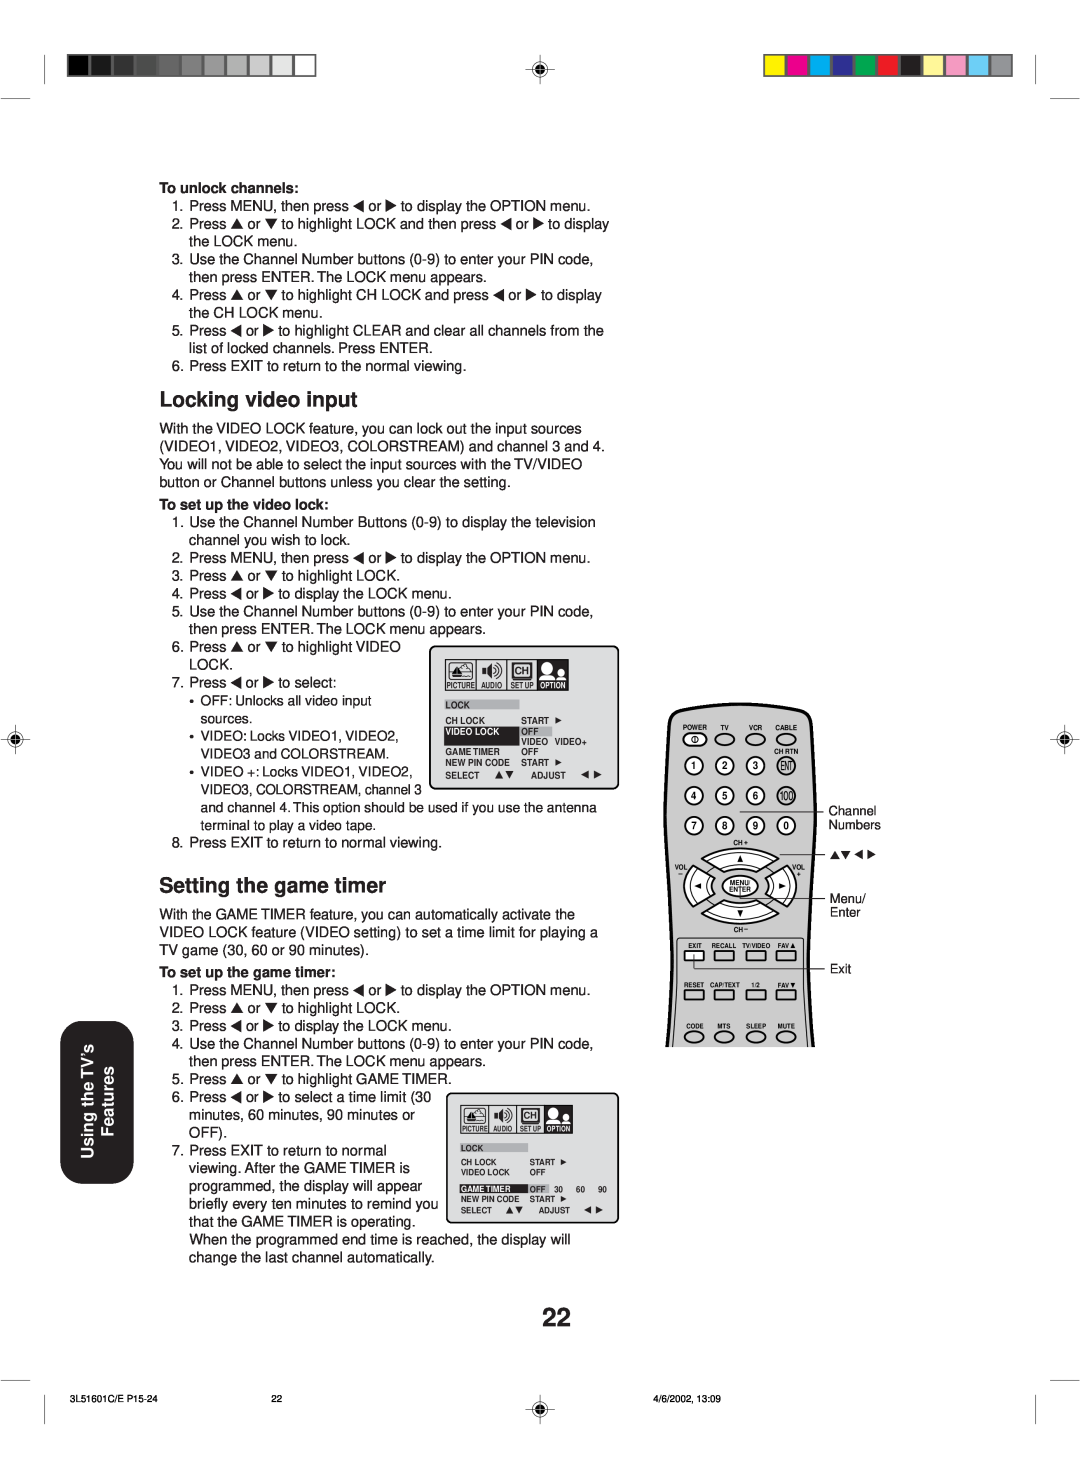 Toshiba TV 27A42 appendix Locking video input, Setting the game timer, Using the TV’s Features, To unlock channels 